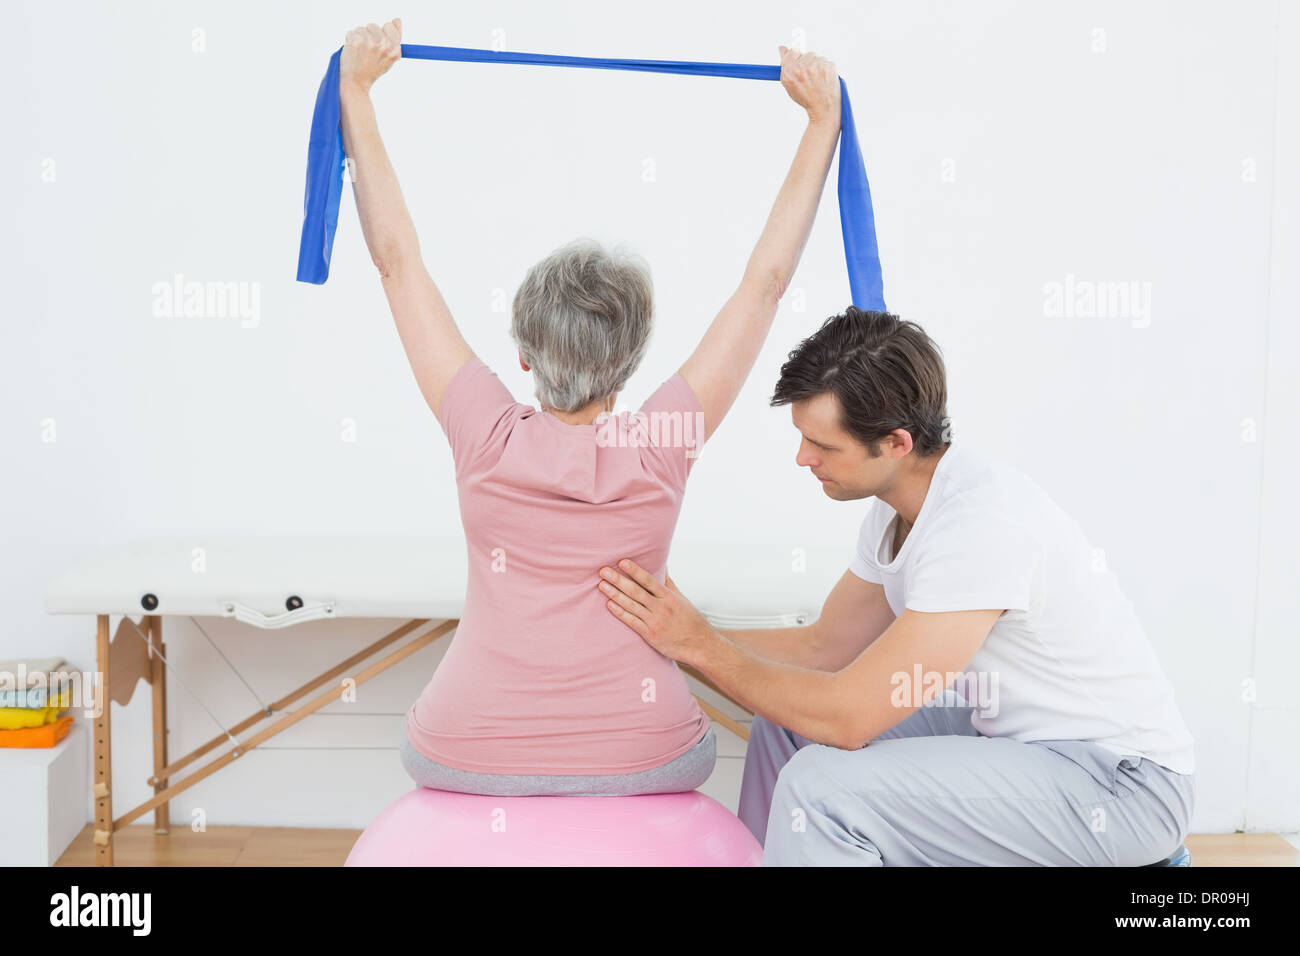 Senior woman on yoga ball with a physical therapist Stock Photo